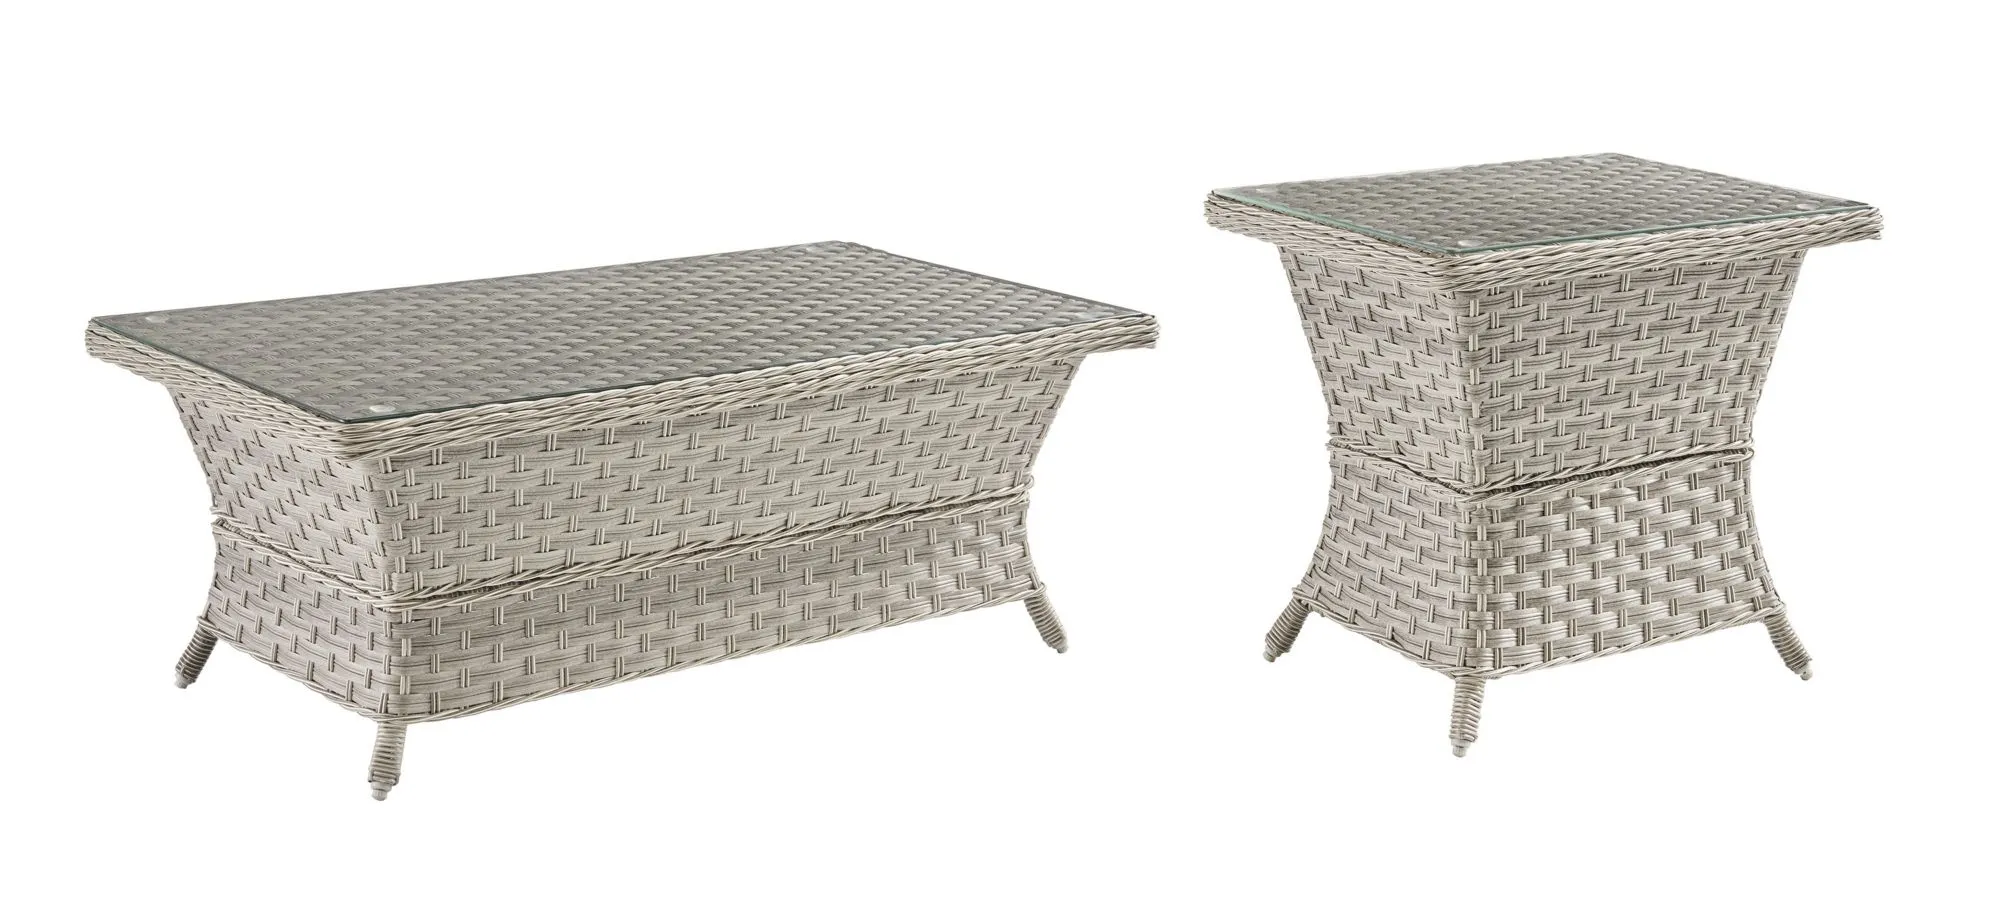 Mayfair 2-pc. Oudoor Table Set in Pebble by South Sea Outdoor Living